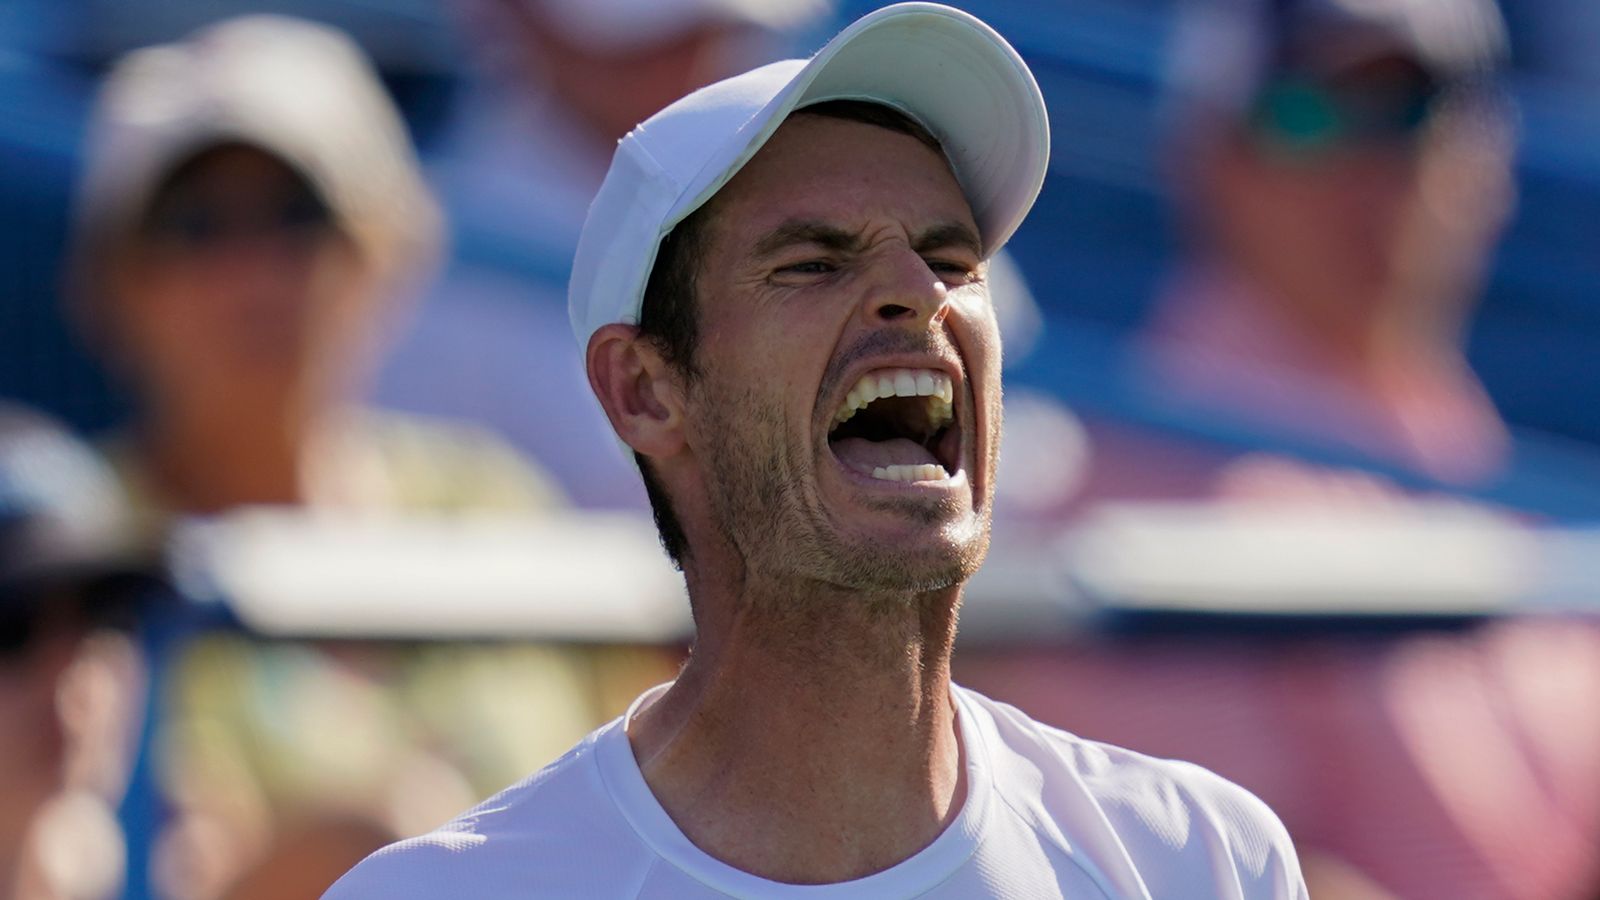 Washington Citi Open: Andy Murray suffers first round loss to Mikeal Ymer